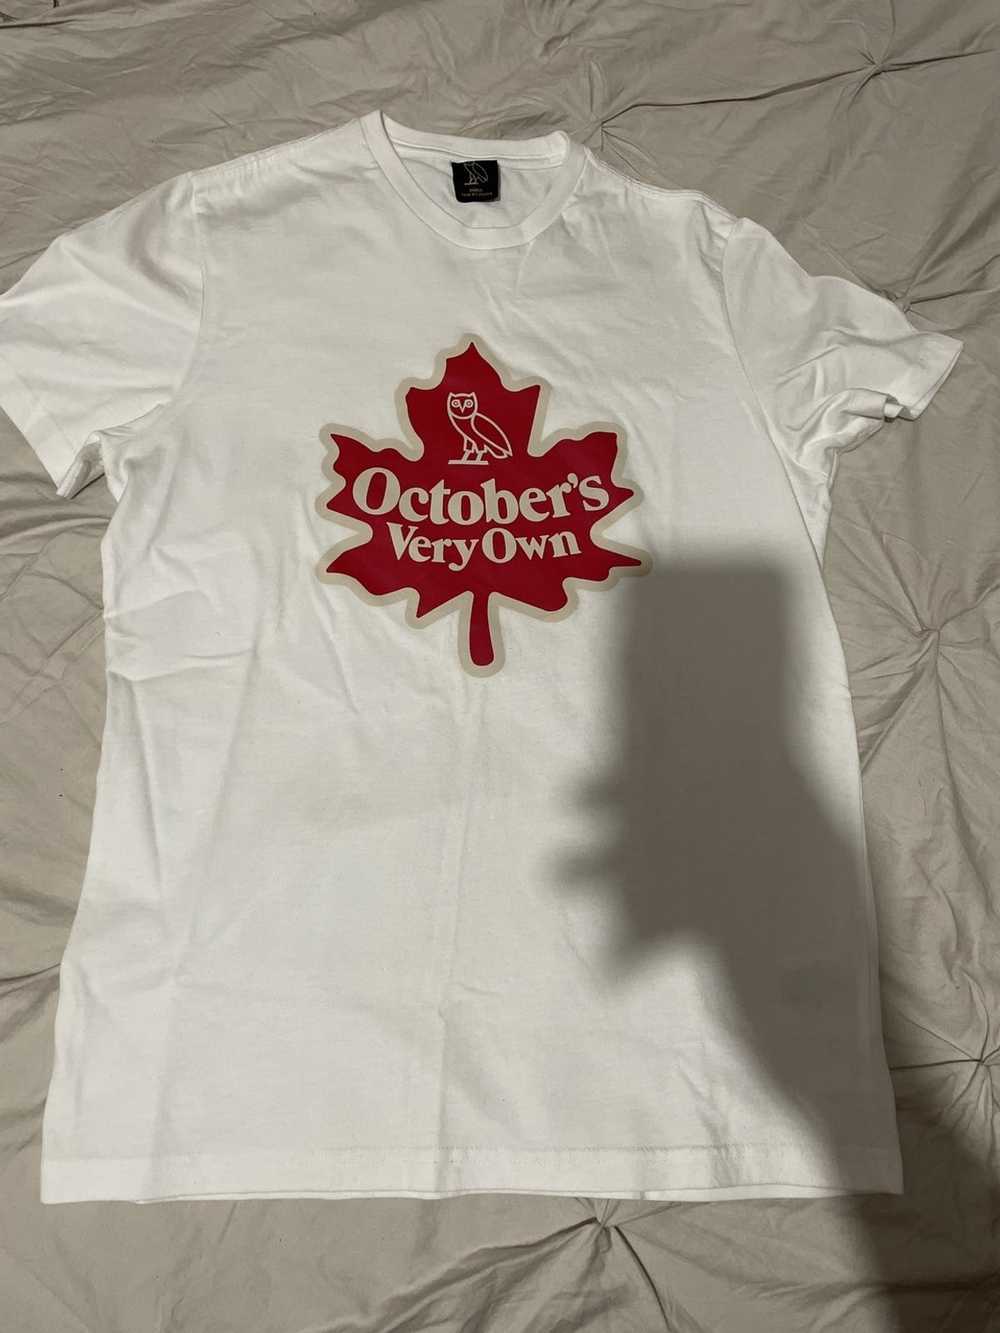 Octobers Very Own OVO Canada maple leaf t shirt - image 1